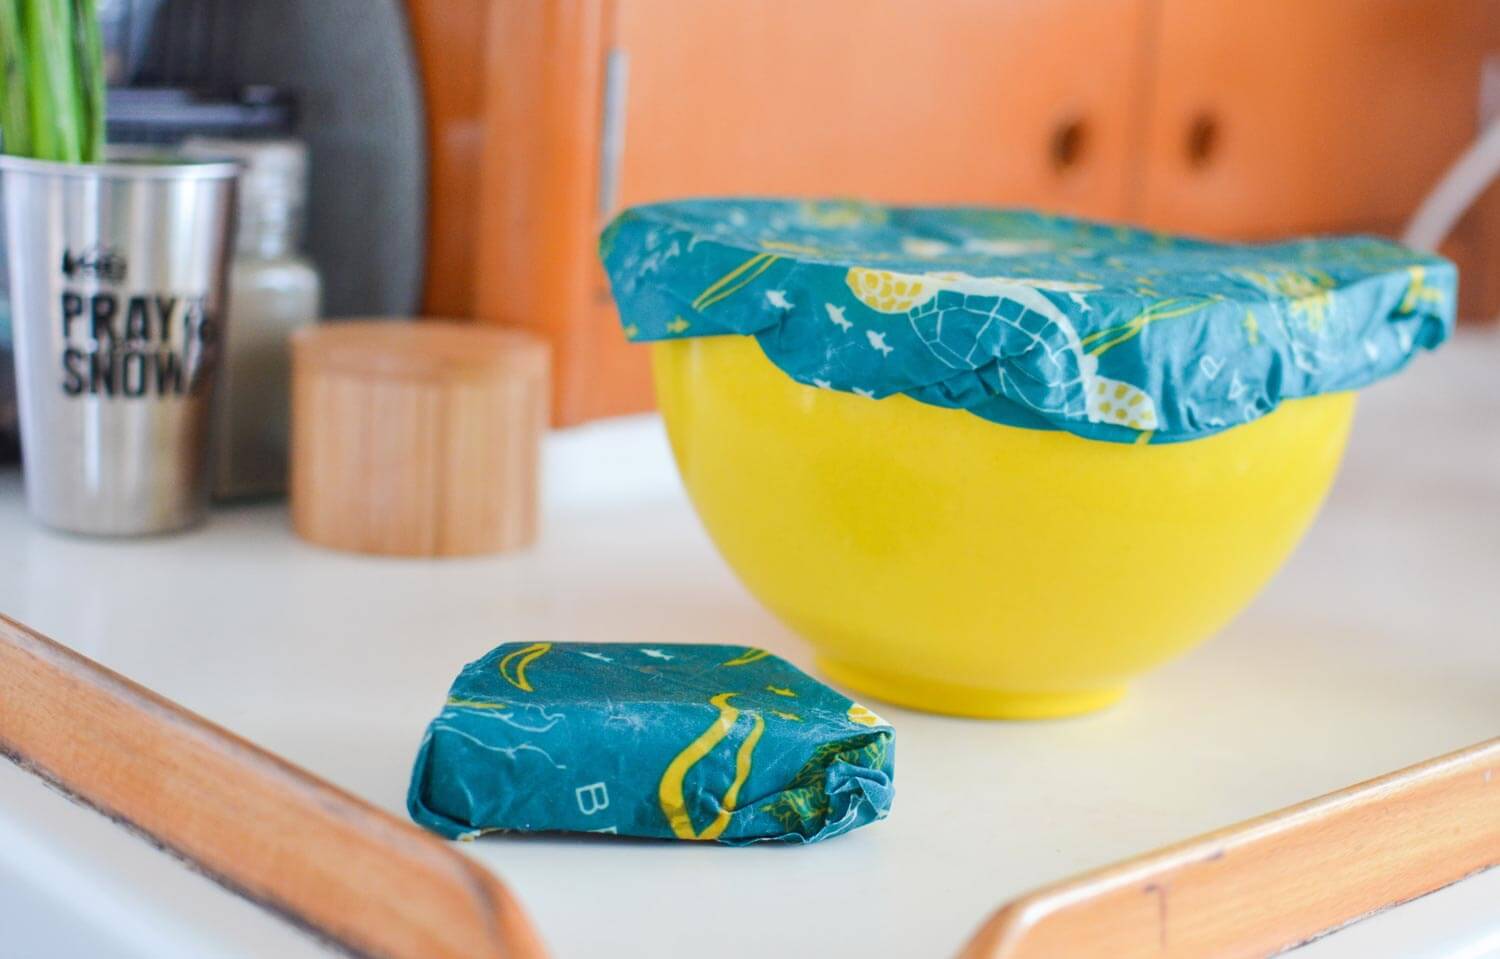 Beeswax wrap covering a bowl on the boat galley countertop